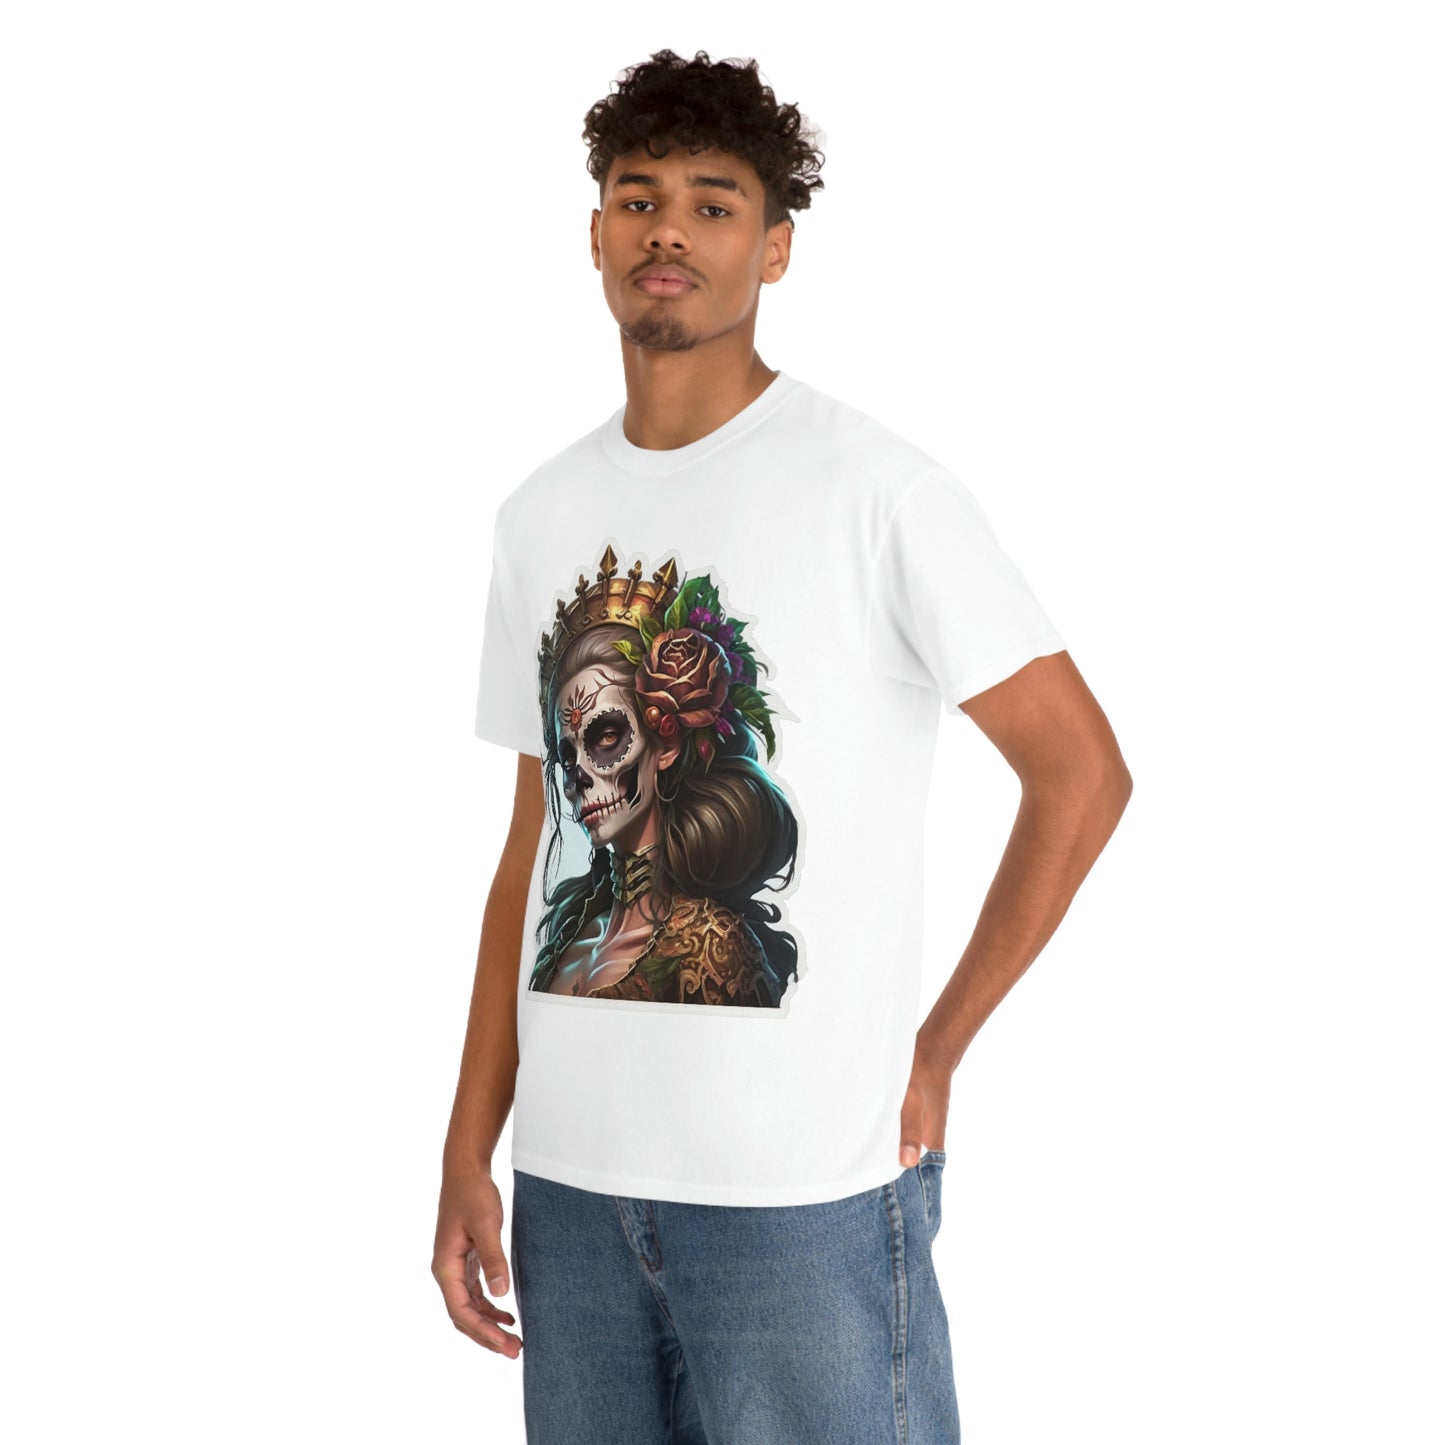 Day Of the Dead - Lady of the Rose - Unisex Heavy Cotton Tee 34035